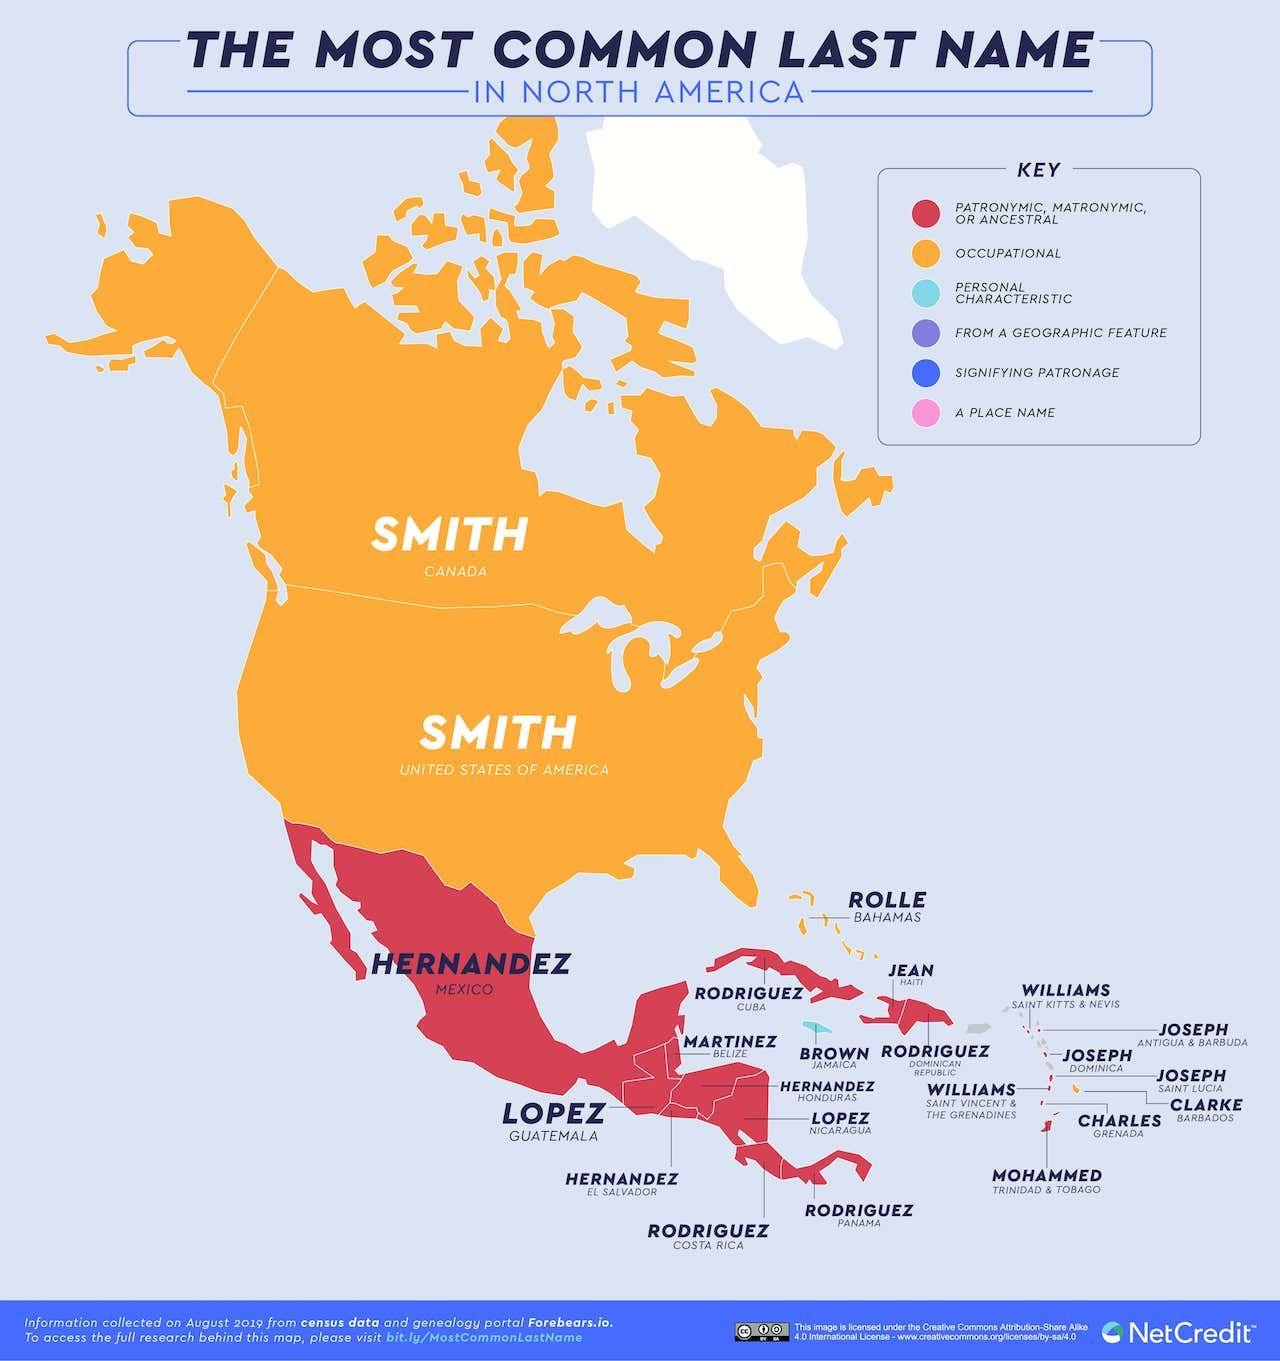 05_The-most-common-last-name-in-every-country_NorthAmerica.jpg